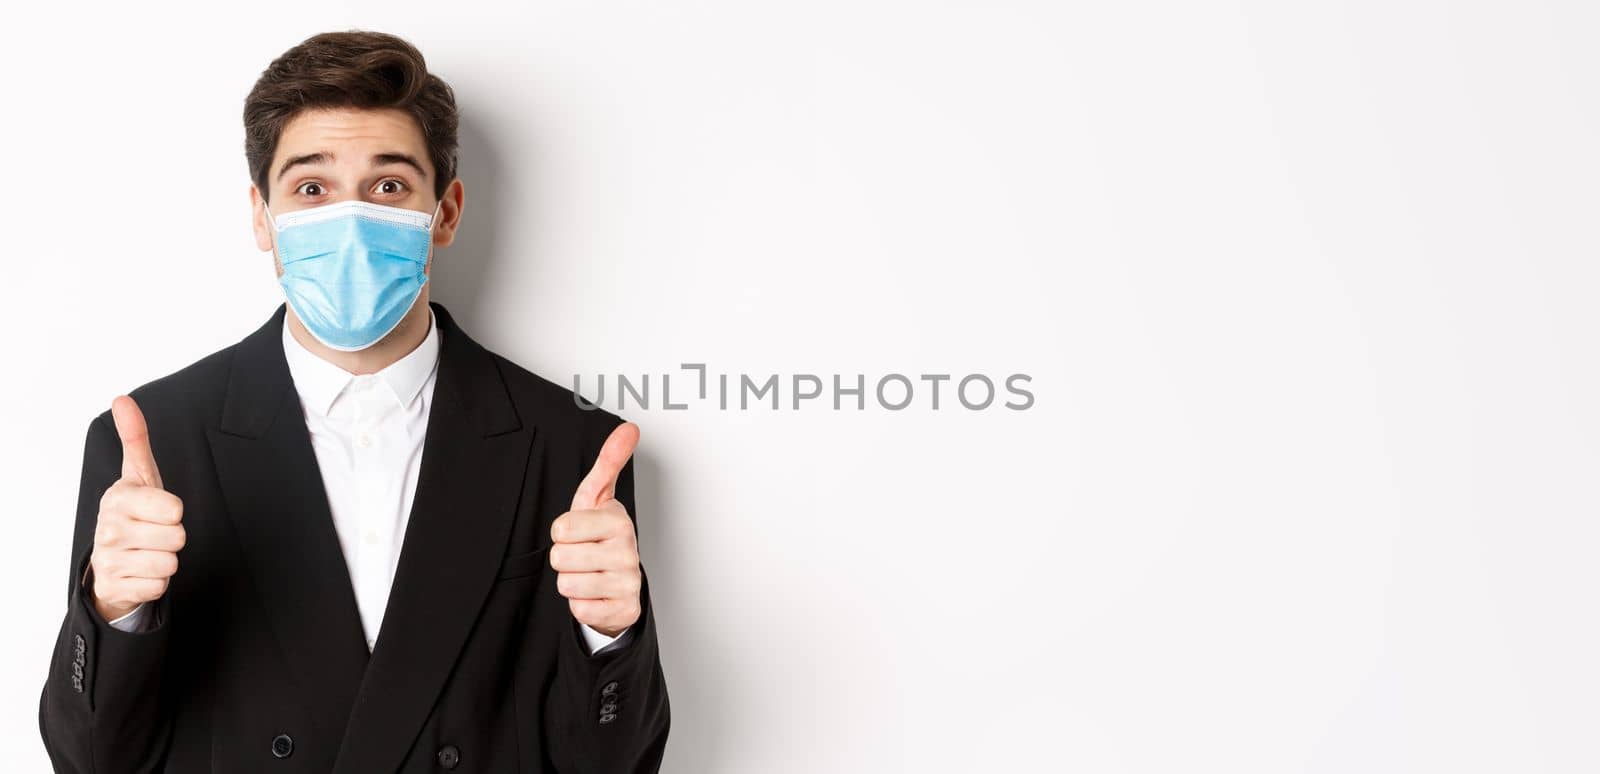 Concept of covid-19, business and social distancing. Close-up of happy businessman in black suit and medical mask, showing thumbs-up, making a compliment, white background.